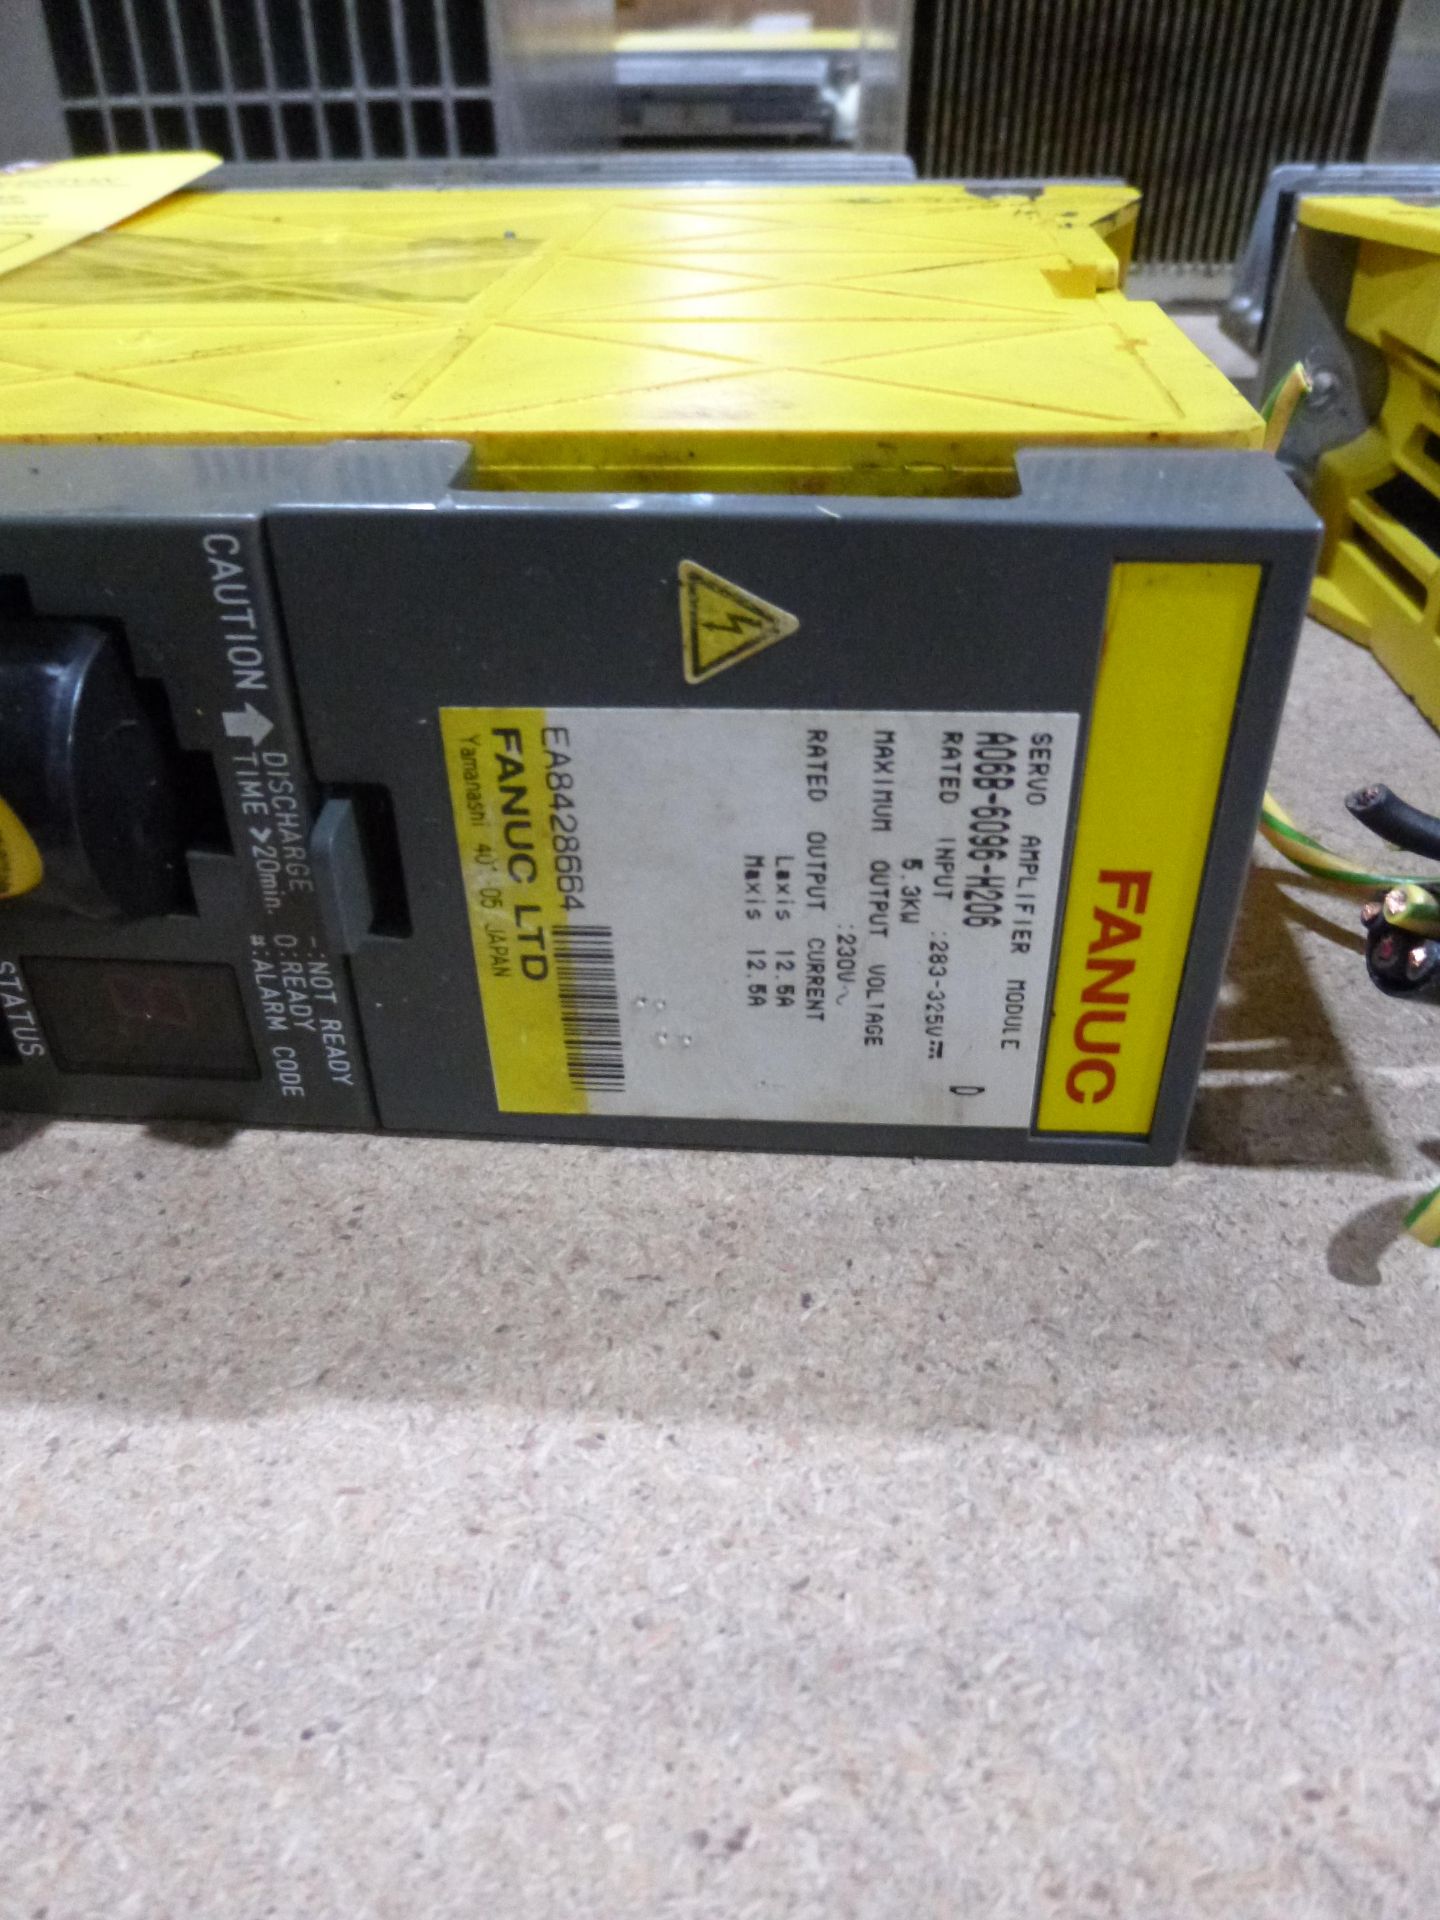 Fanuc servo amplifier module A06B-6096-H206, as always with Brolyn LLC auctions, all lots can be - Image 2 of 2